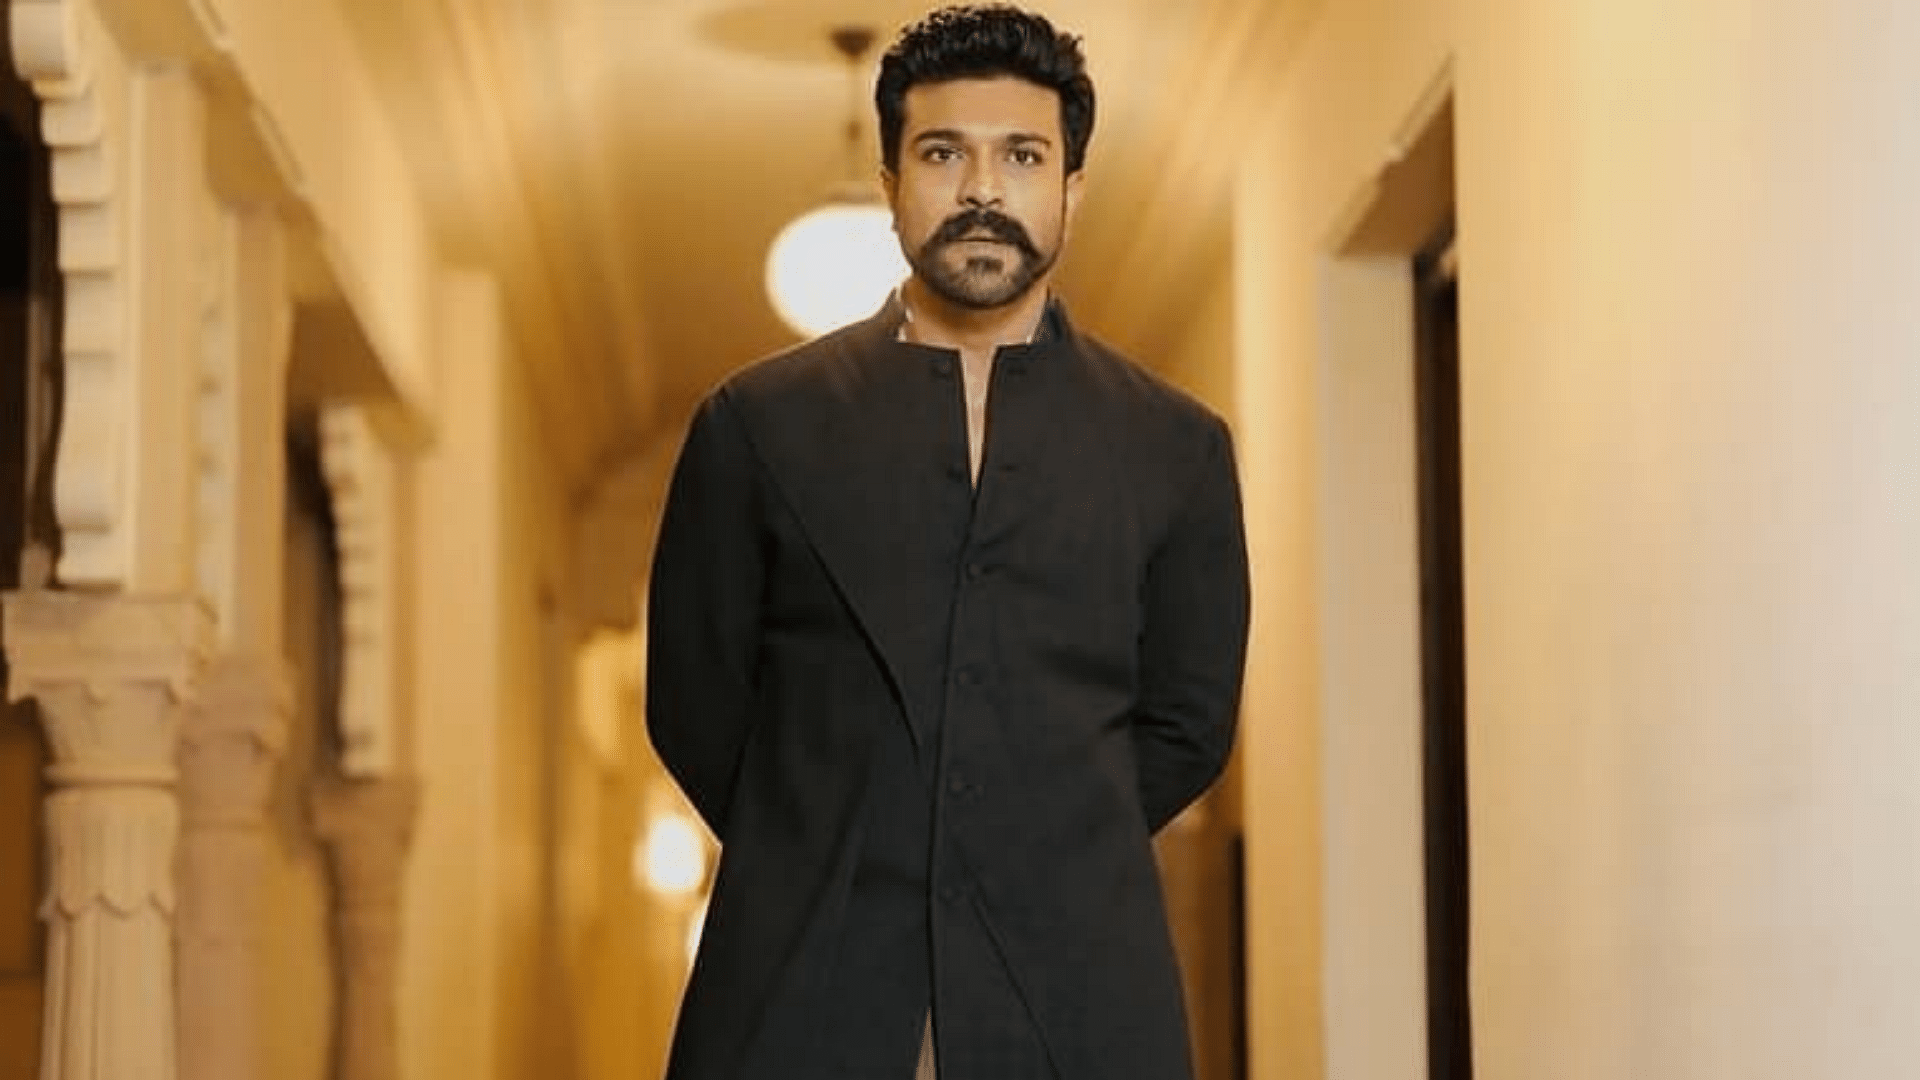 Actor Ram Charan has tested positive for COVID-19.